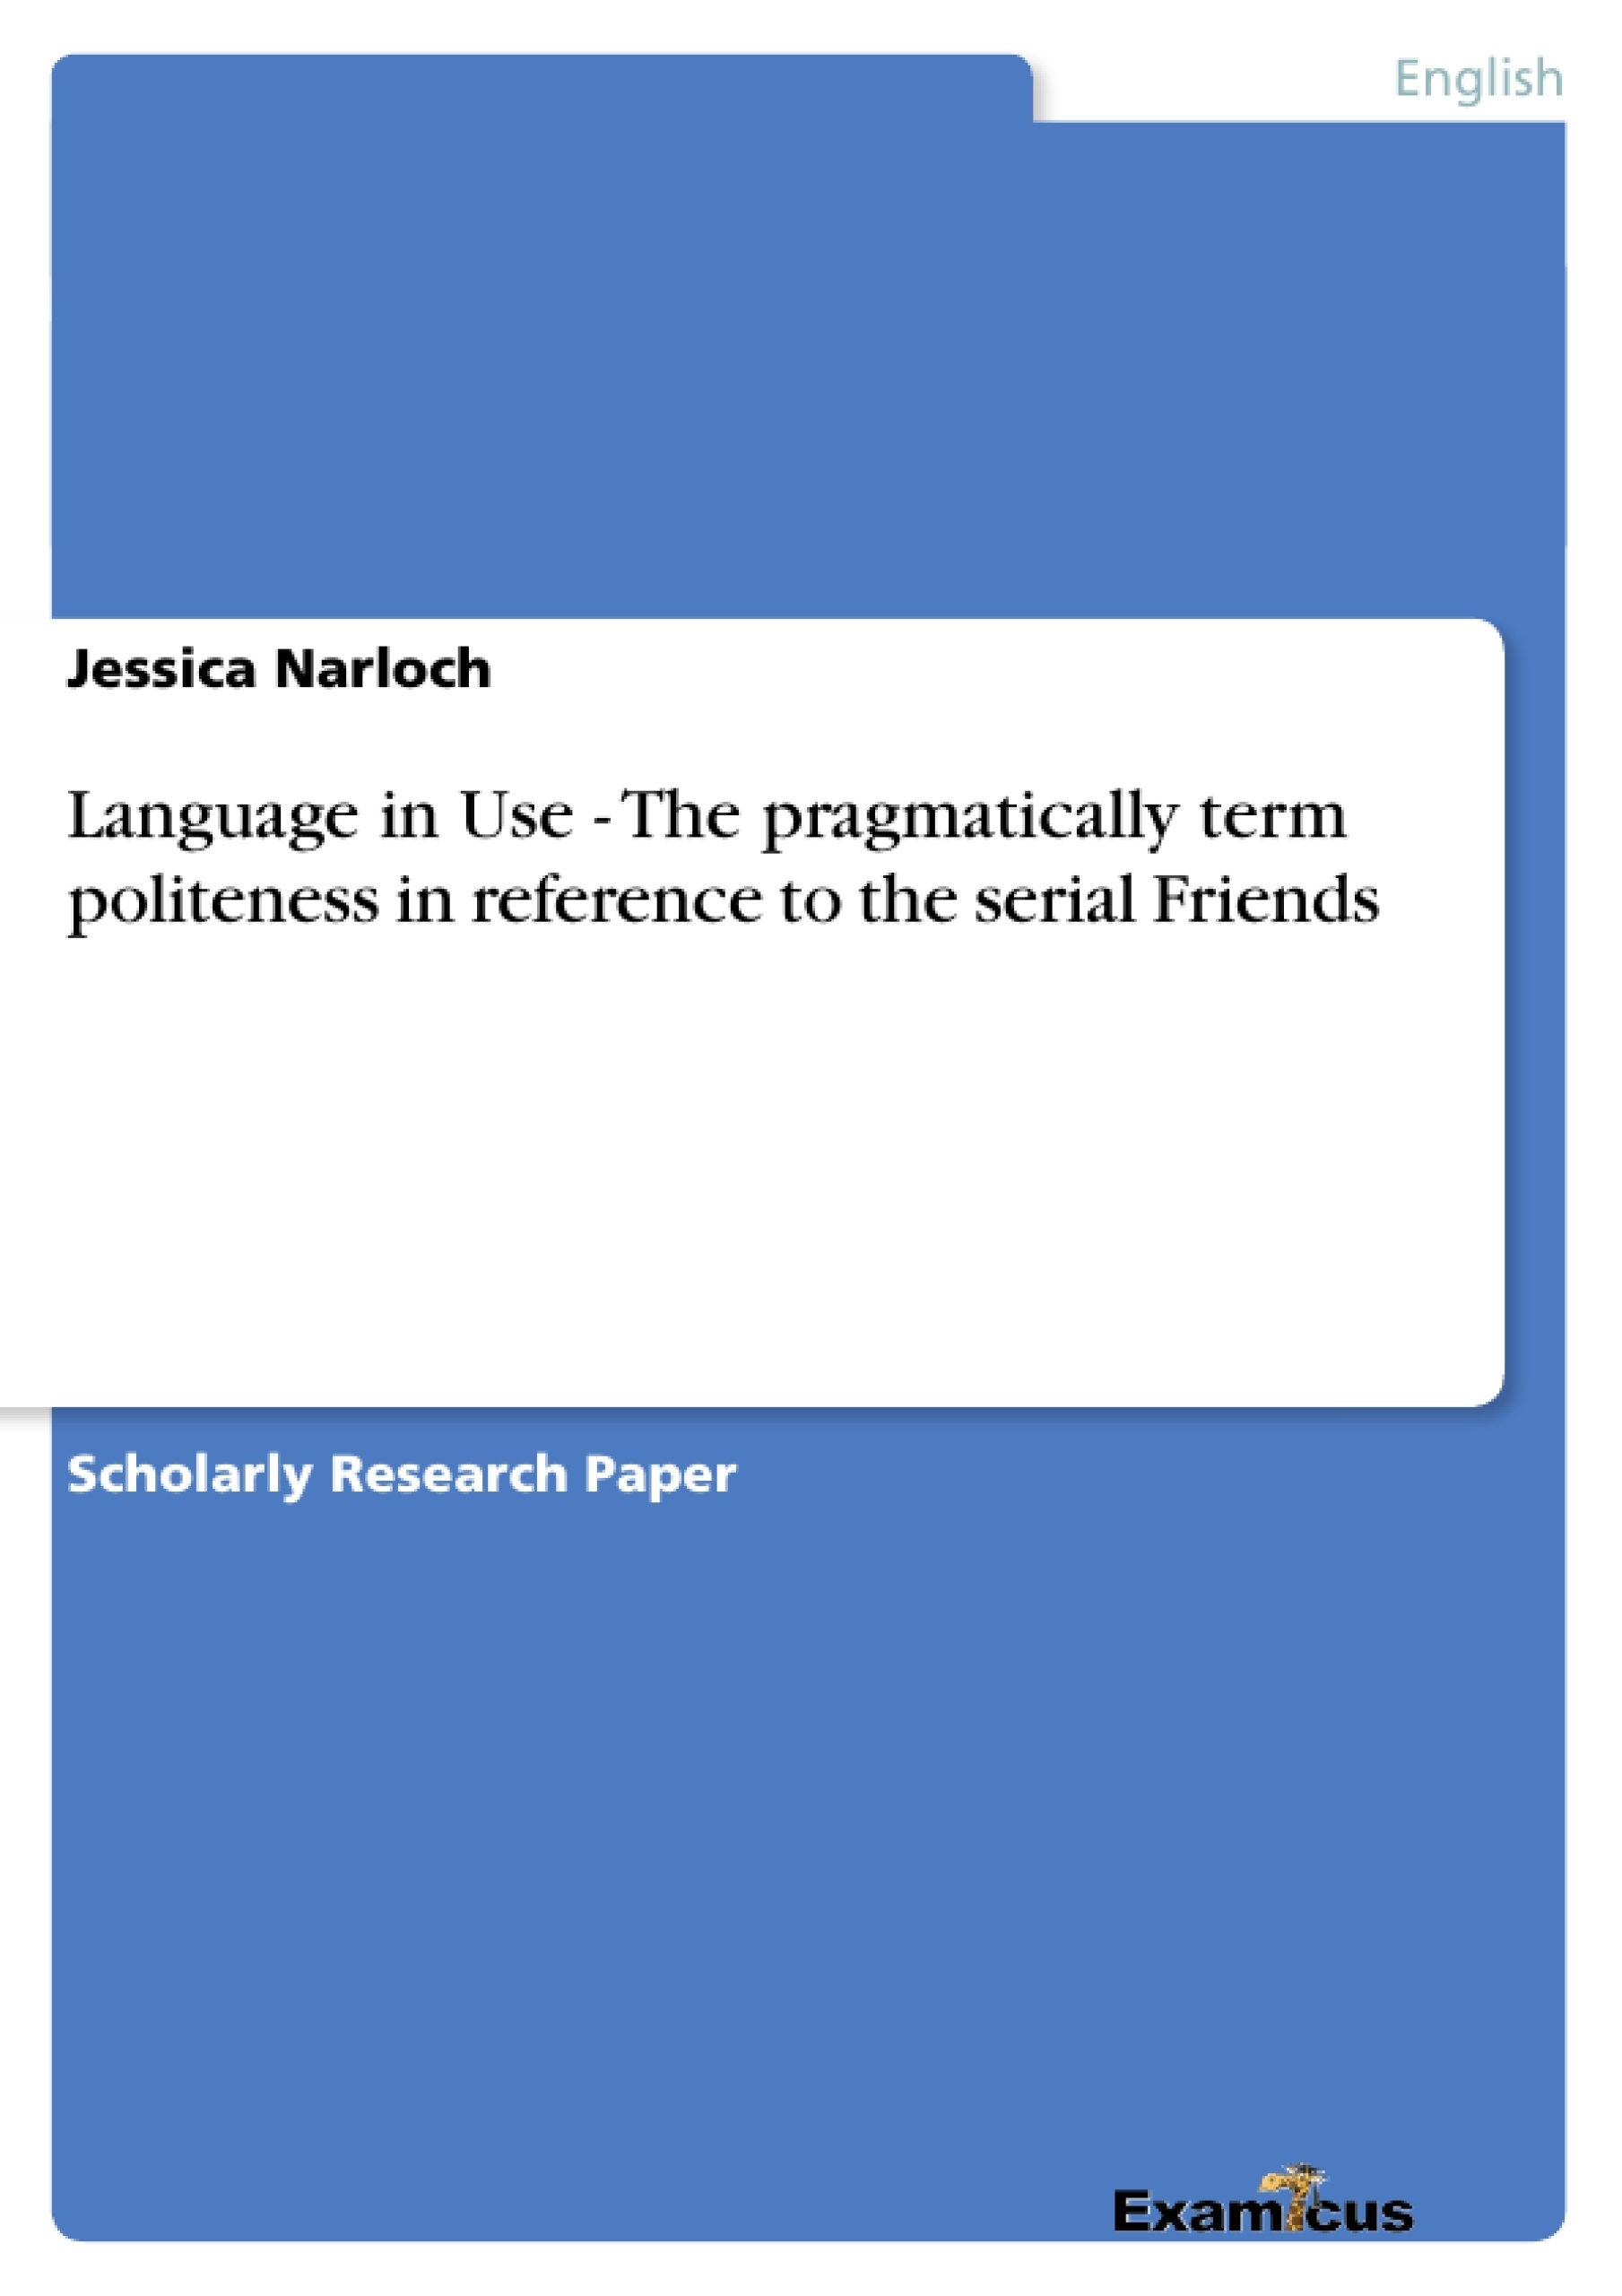 Title: Language in Use - The pragmatically term politeness in reference to the serial Friends